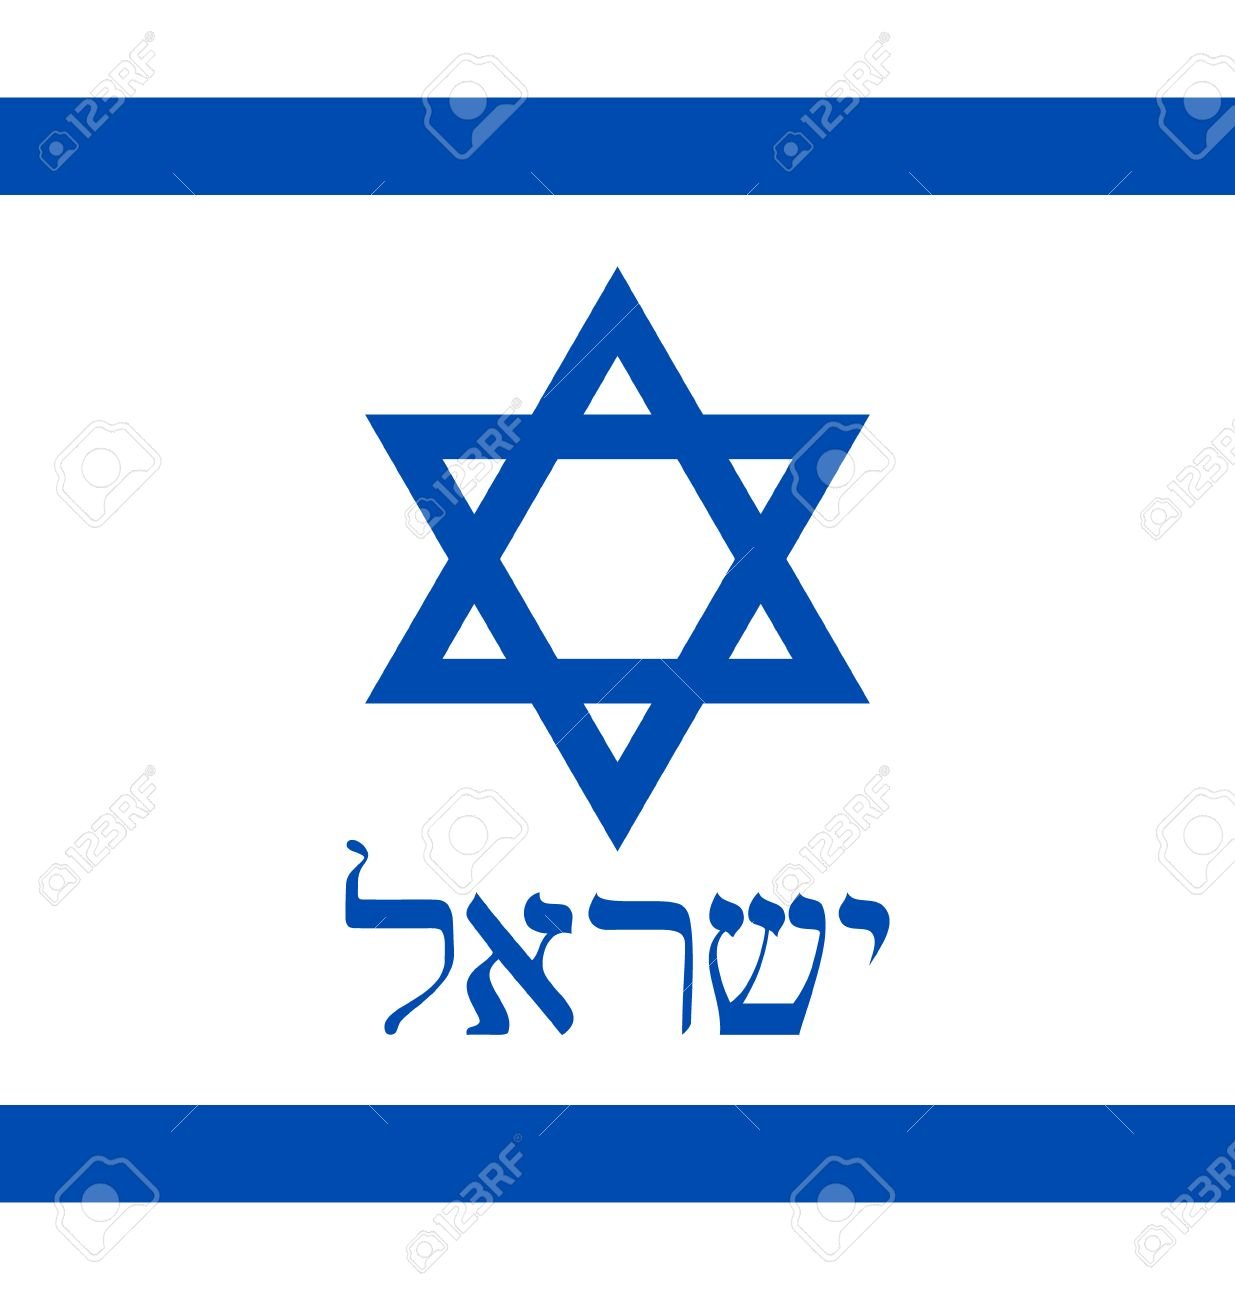 36466555-israeli-flag-with-lettering-text-israel-in-hebrew-language-Stock-Vector.jpg